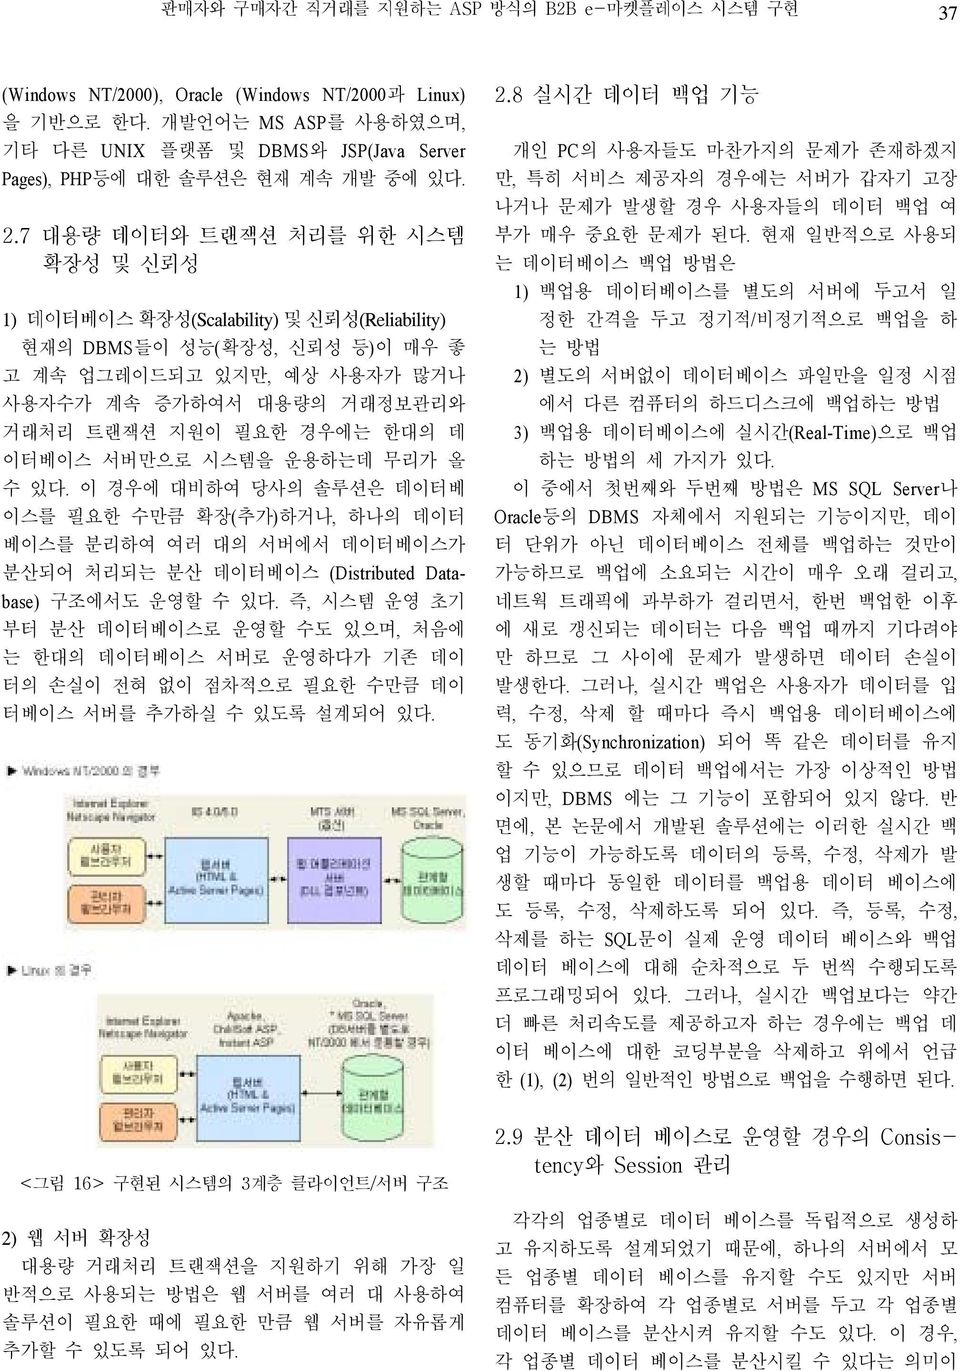 ( ), (Distributed Database).,,. 2.8 실시간 데이터 백업 기능 PC,. 1) / 2) 3) (Real-Time). MS SQL Server Oracle DBMS,,,.